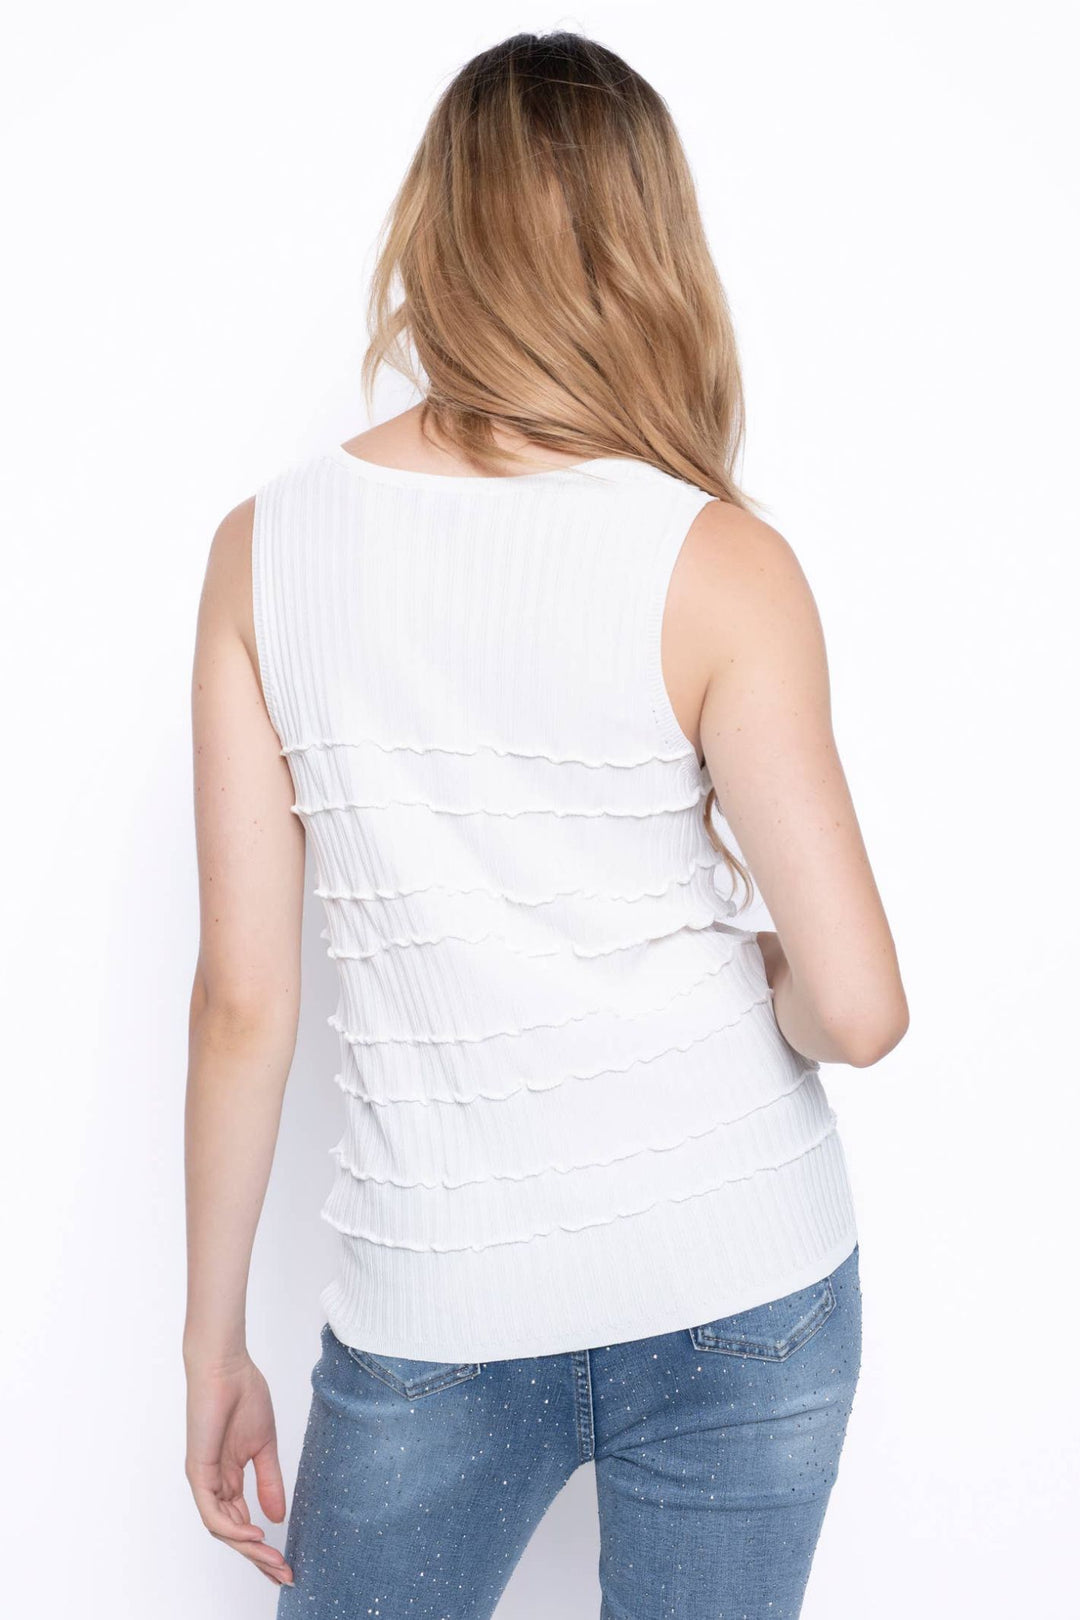 Picadilly JK341 White Ruffle Design Vest Top